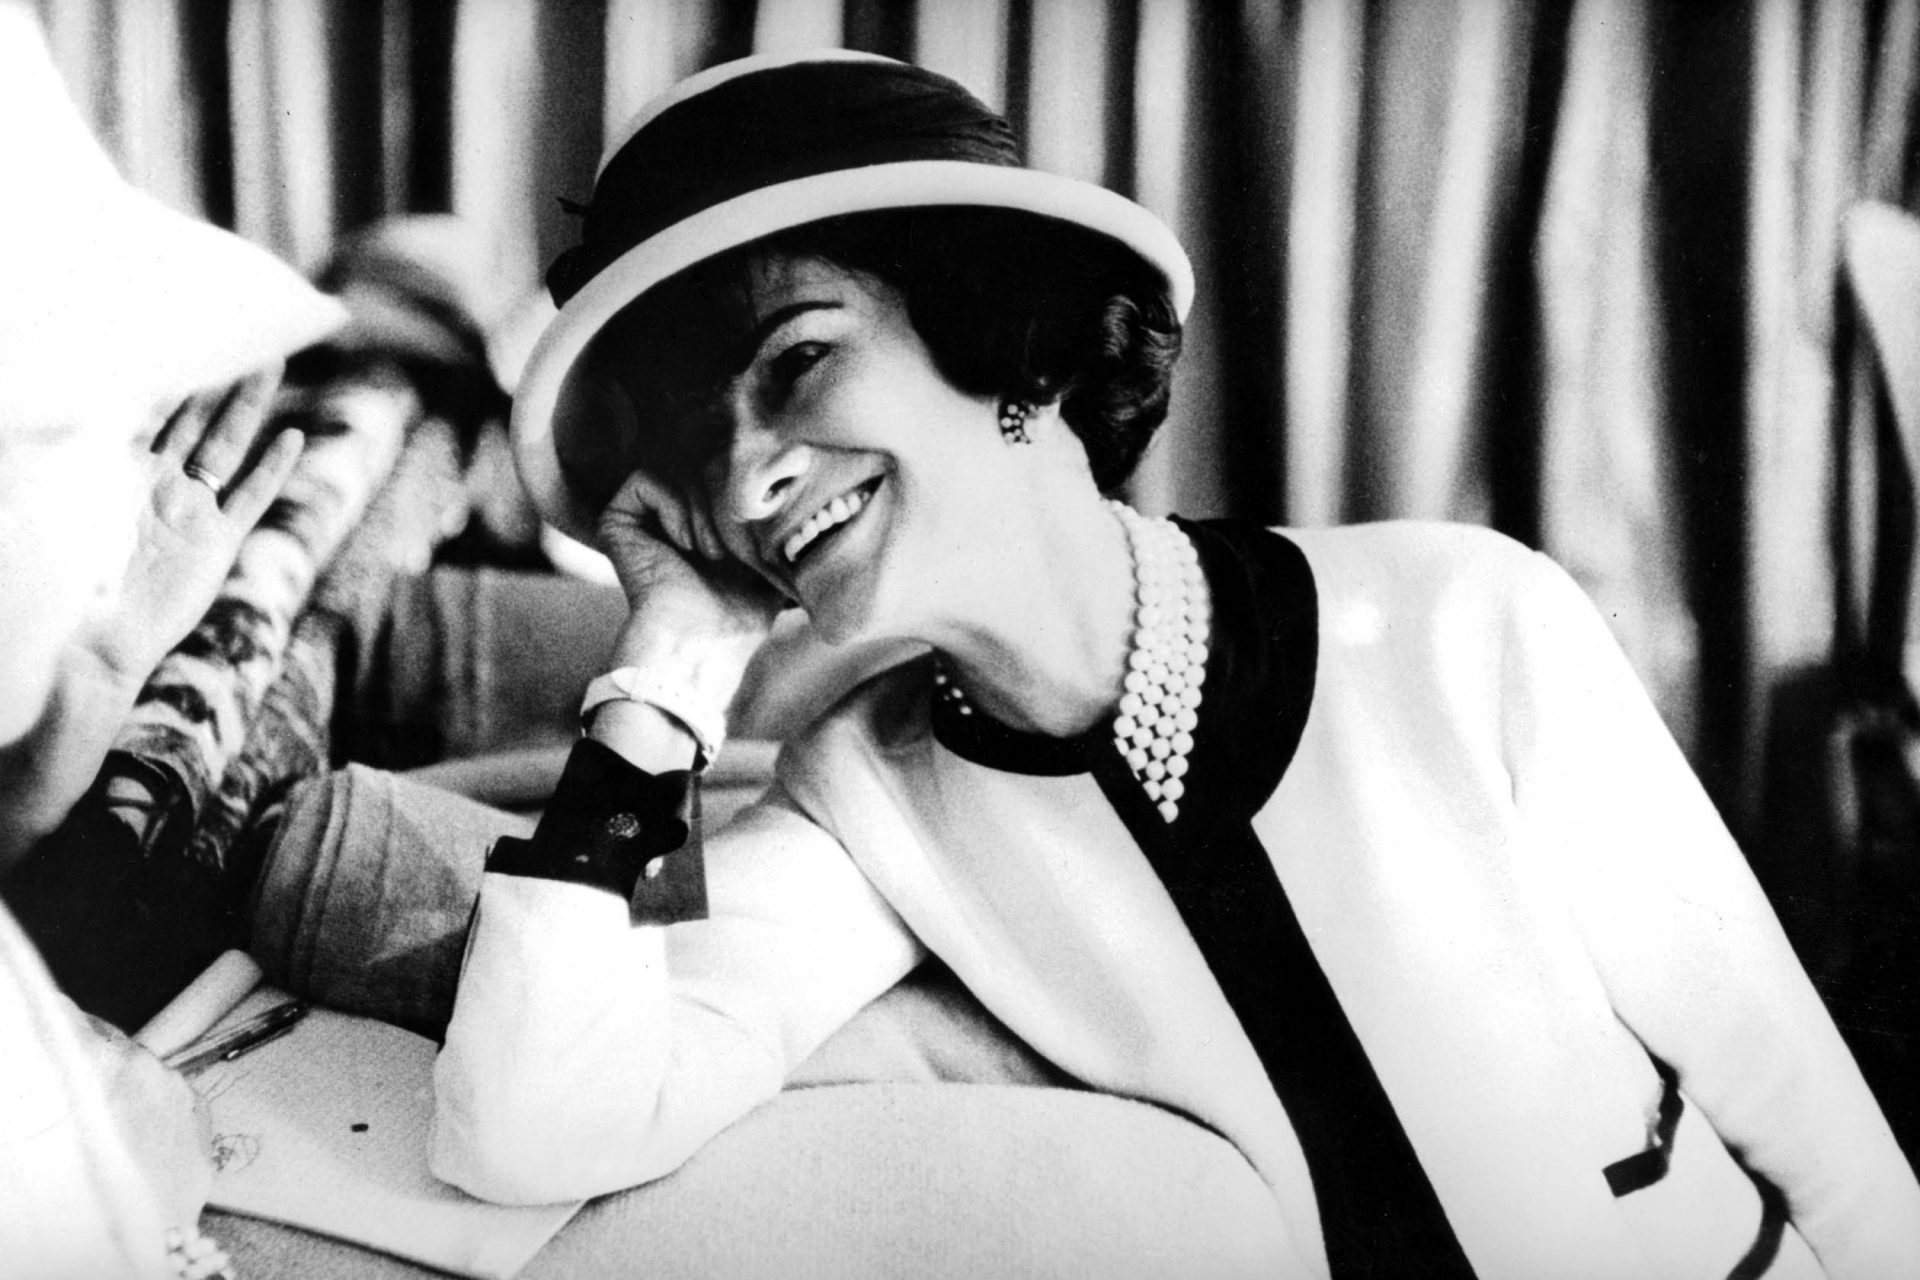 <p>On January 10, 1971, Gabrielle Chanel, aka Coco Chanel, was lying in bed at the Ritz in Paris when she felt severe pain in her chest. "I’m suffocating, Jeanne," the famous seamstress reportedly said to her maid, before pronouncing these last words, in a panic: "You see, this is how you die."</p>